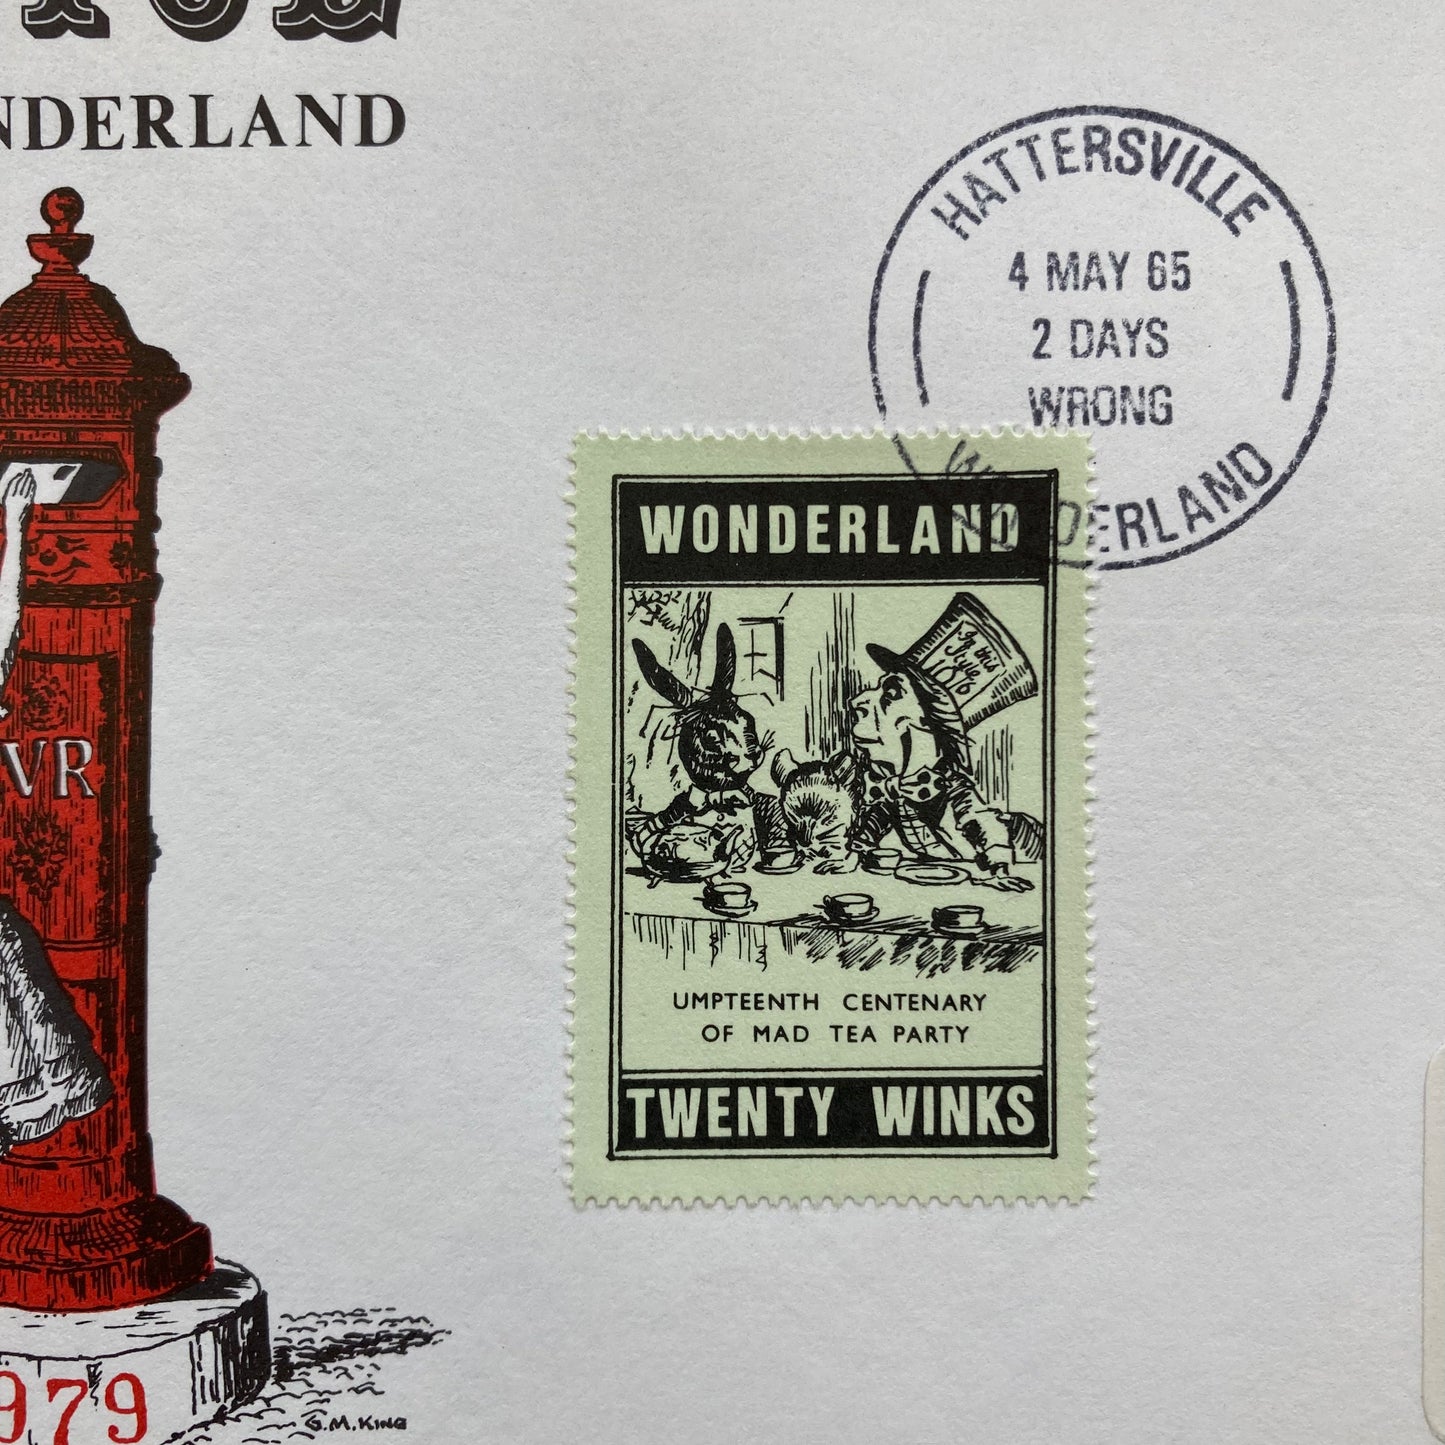 Alice in Wonderland First Day Covers (1979)